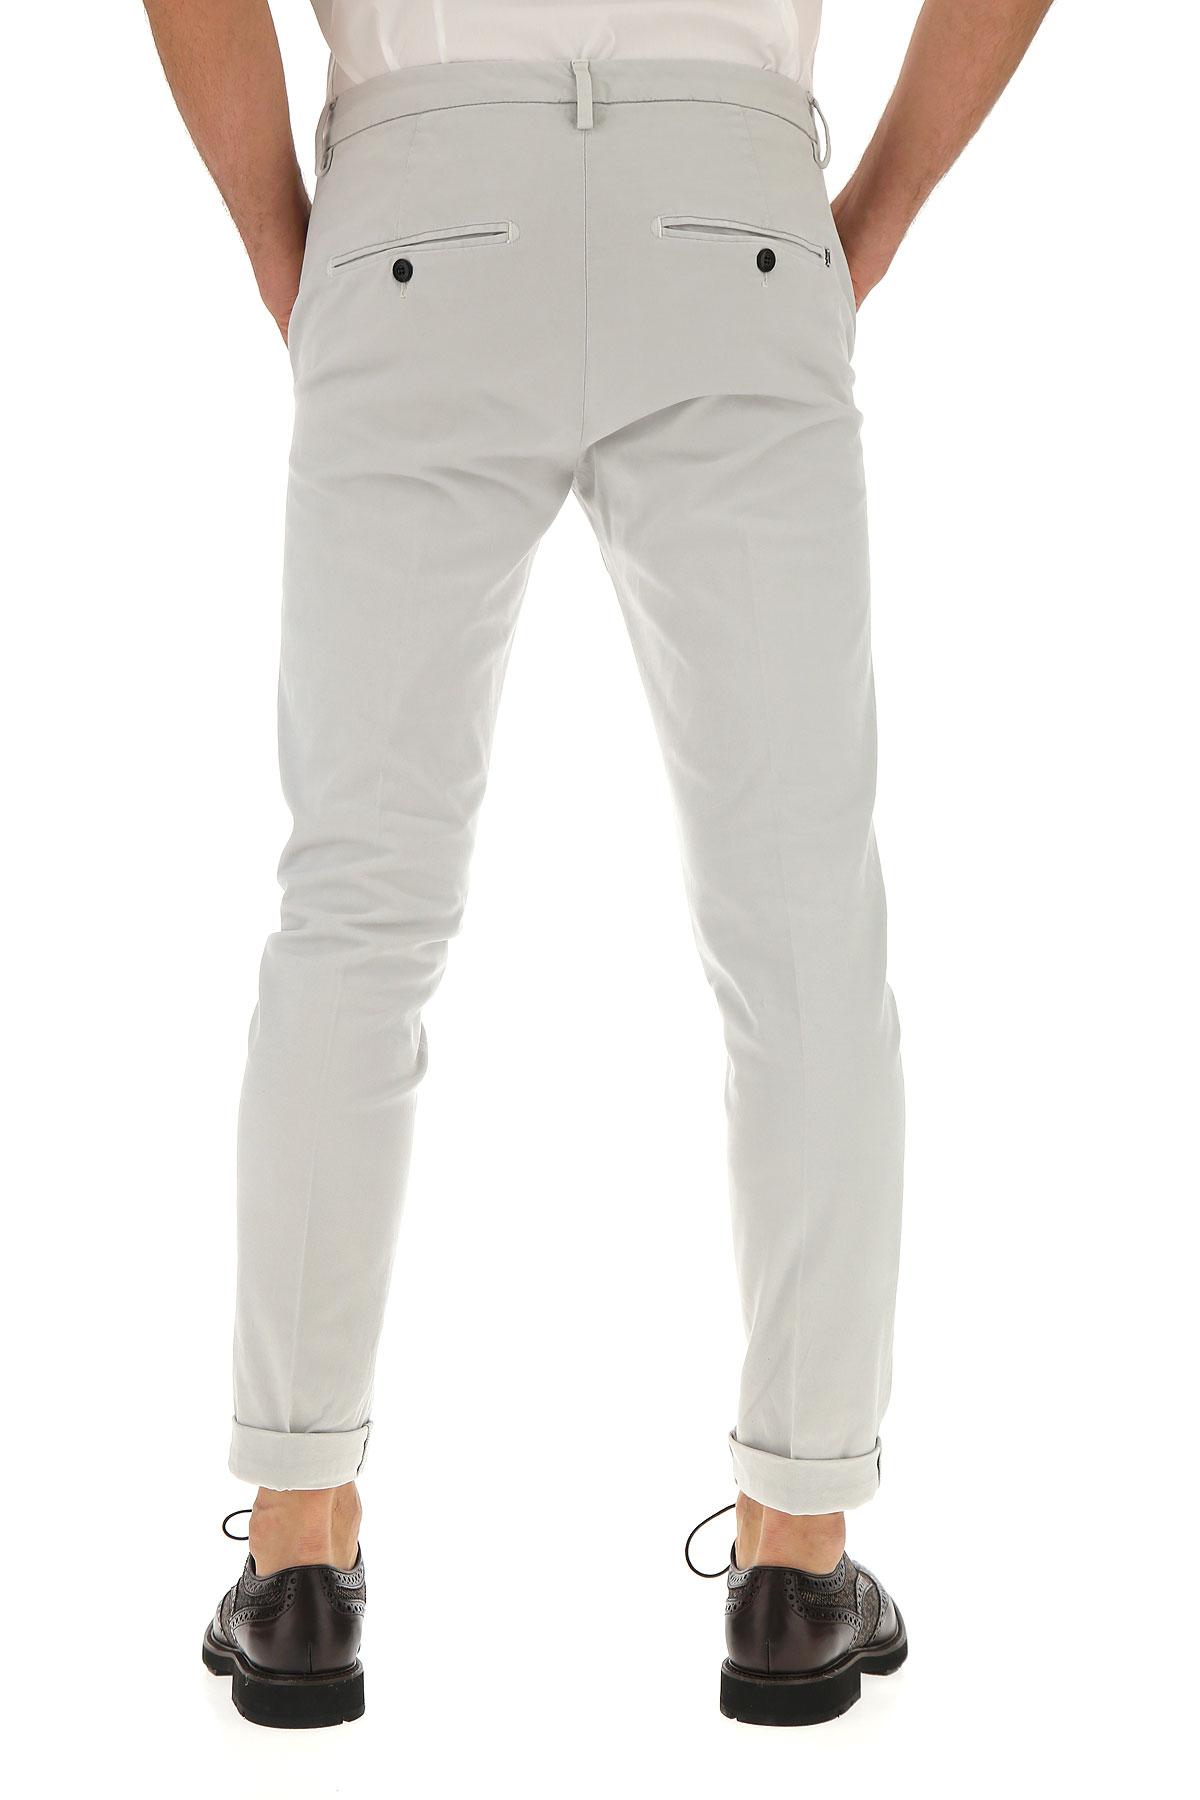 Dondup Cotton Pants For Men in Ice Grey (Gray) for Men - Lyst